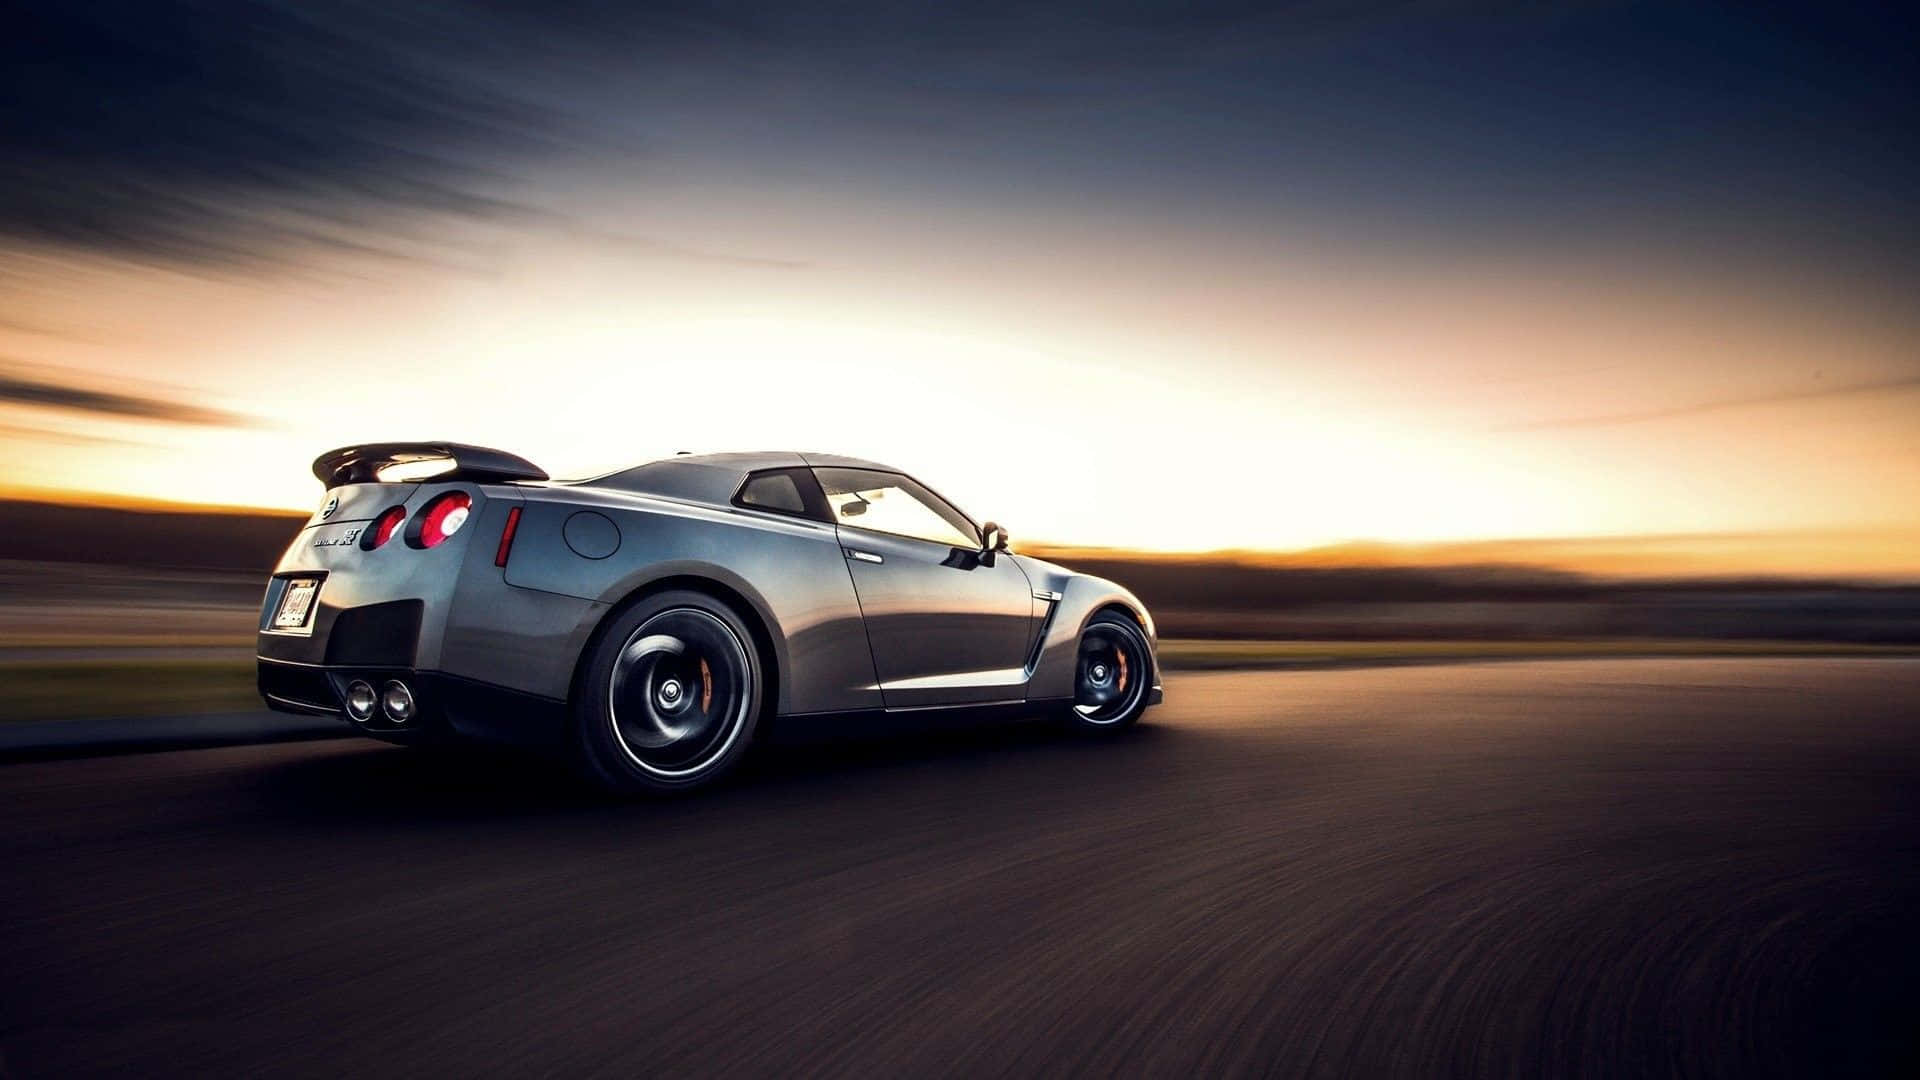 Speed, Style and Power - The Nissan GTR R35 Wallpaper